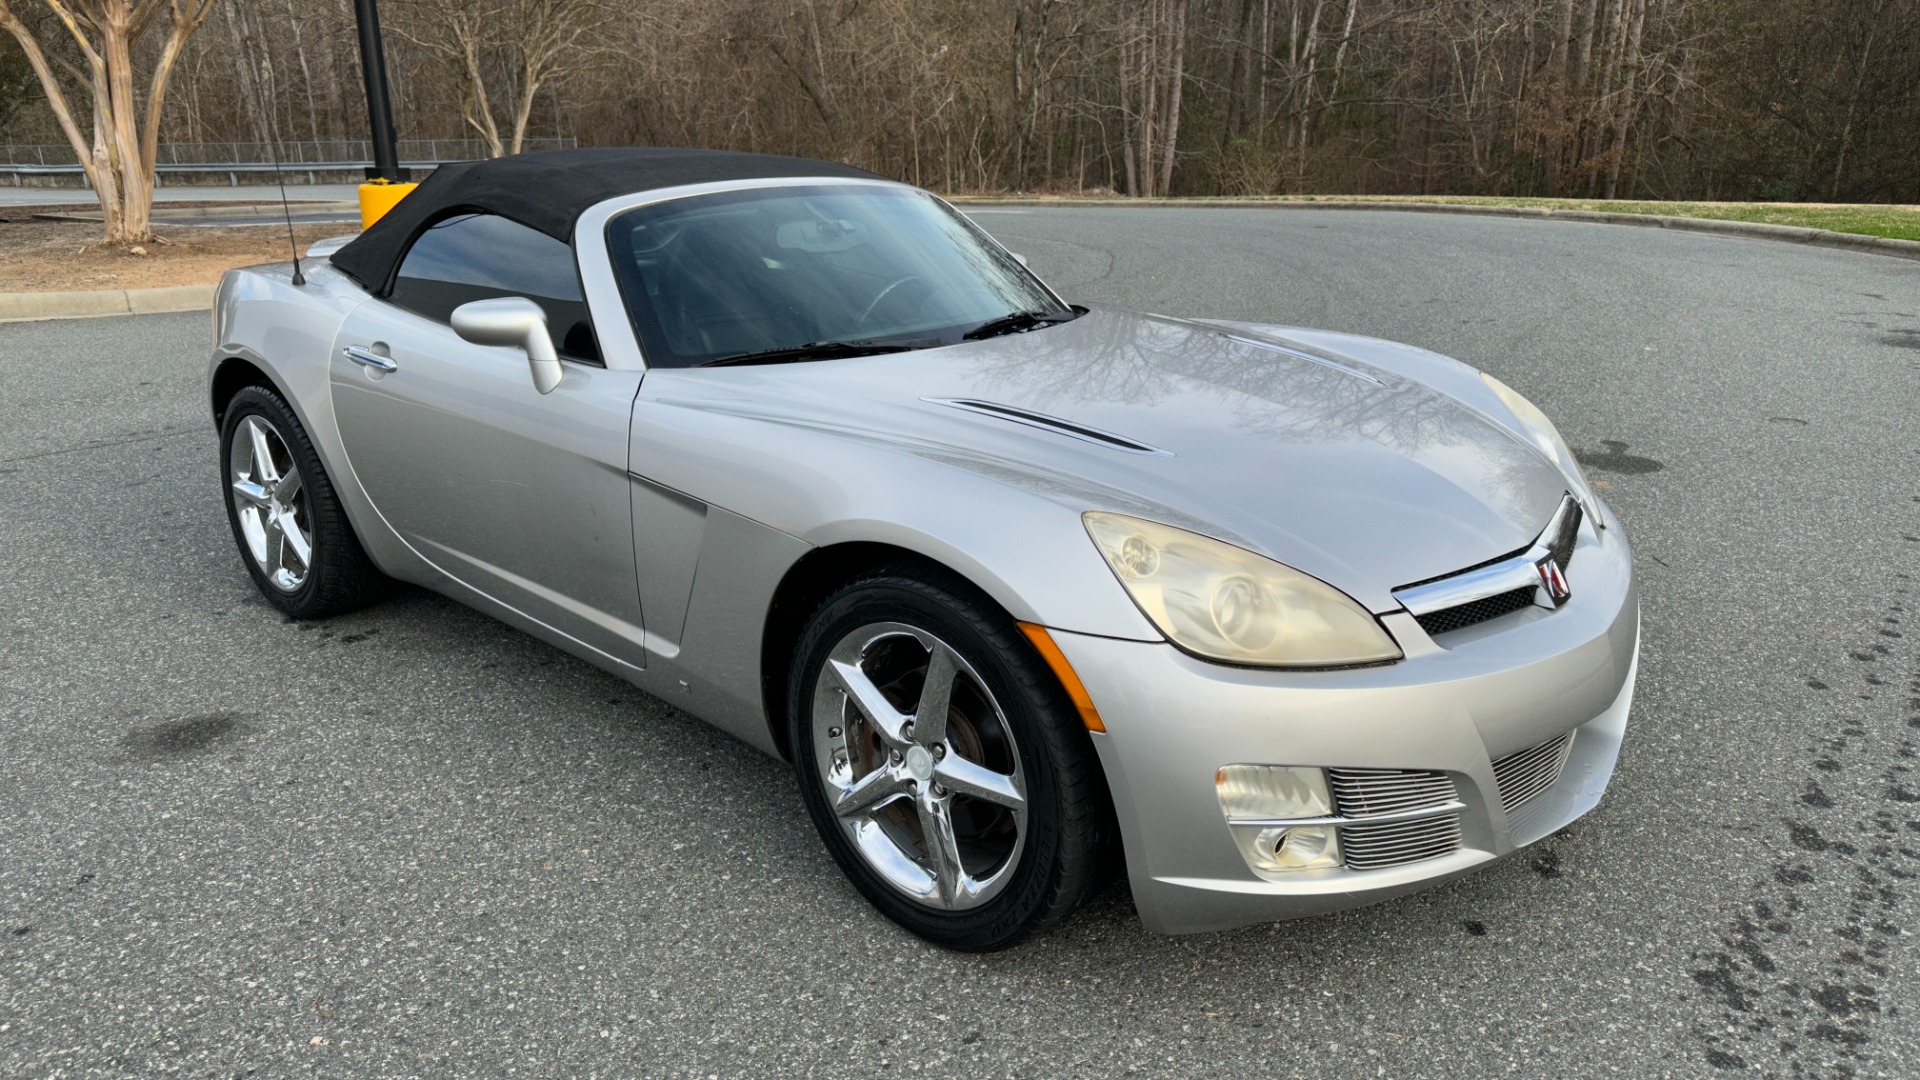 Used 2008 Saturn Sky CONVERTIBLE / MONSOON AUDIO / AUTOMATIC / PREMIUM TRIM / SPOILER for sale Sold at Formula Imports in Charlotte NC 28227 11